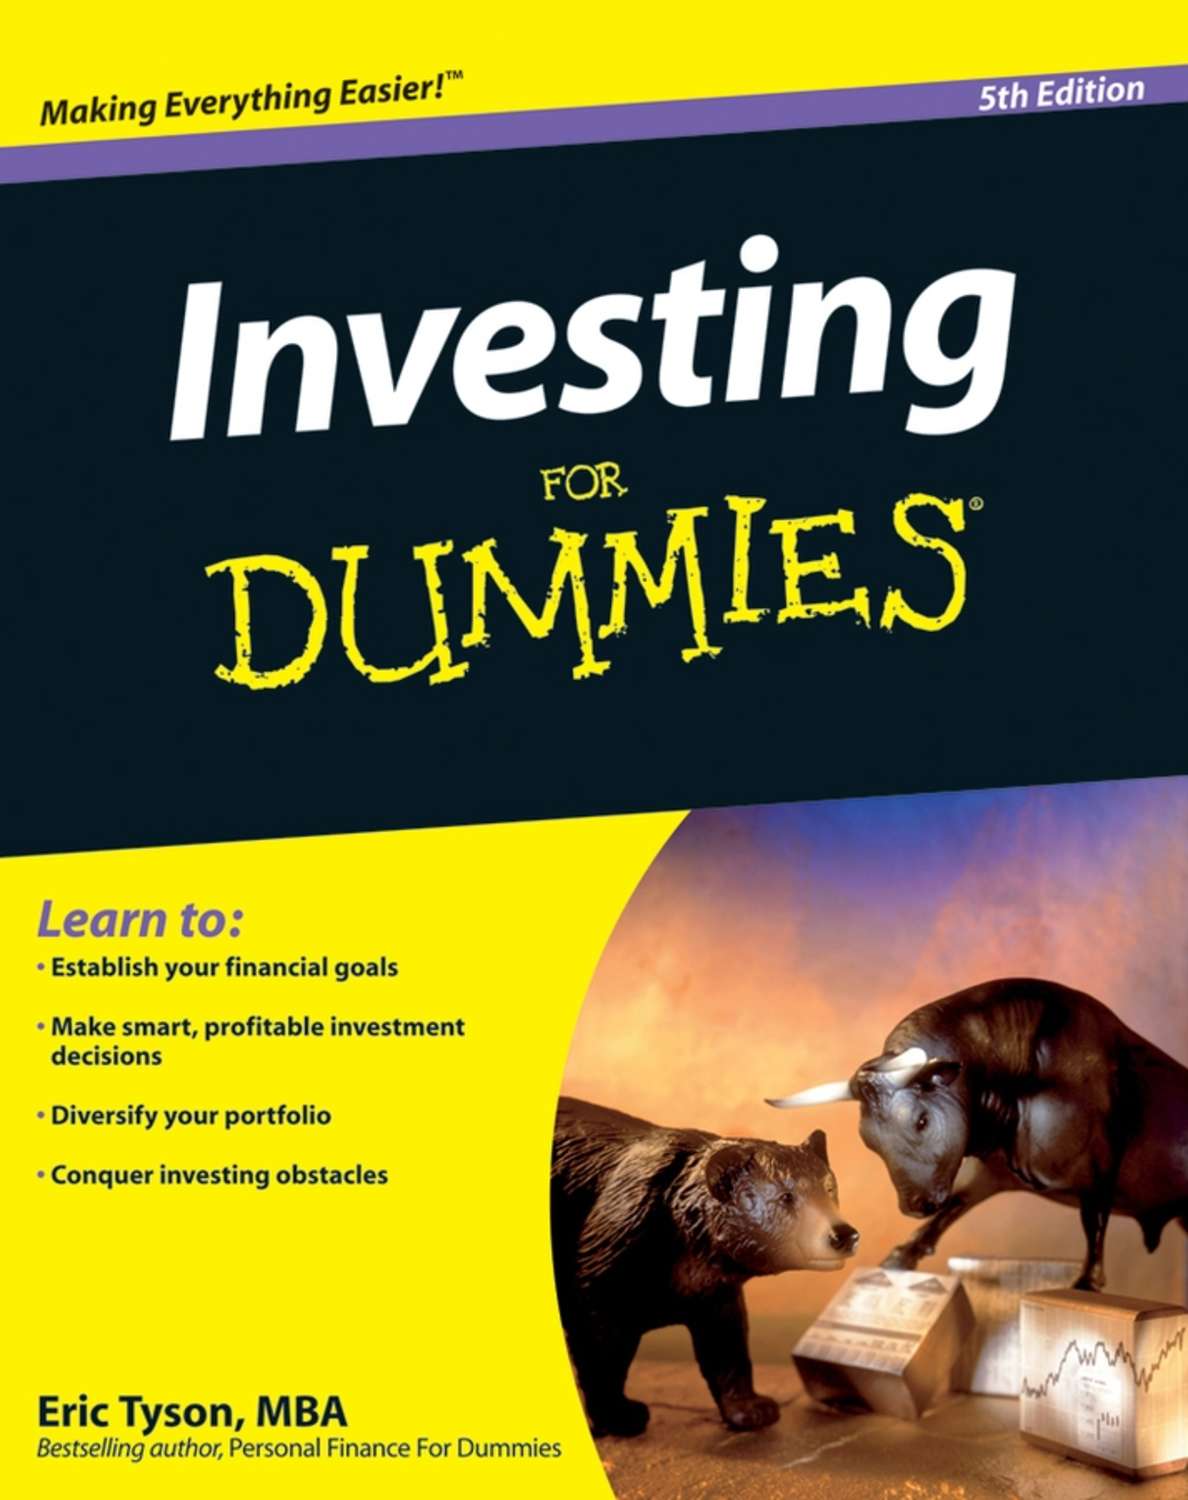 investing for dummies by eric tyson download games